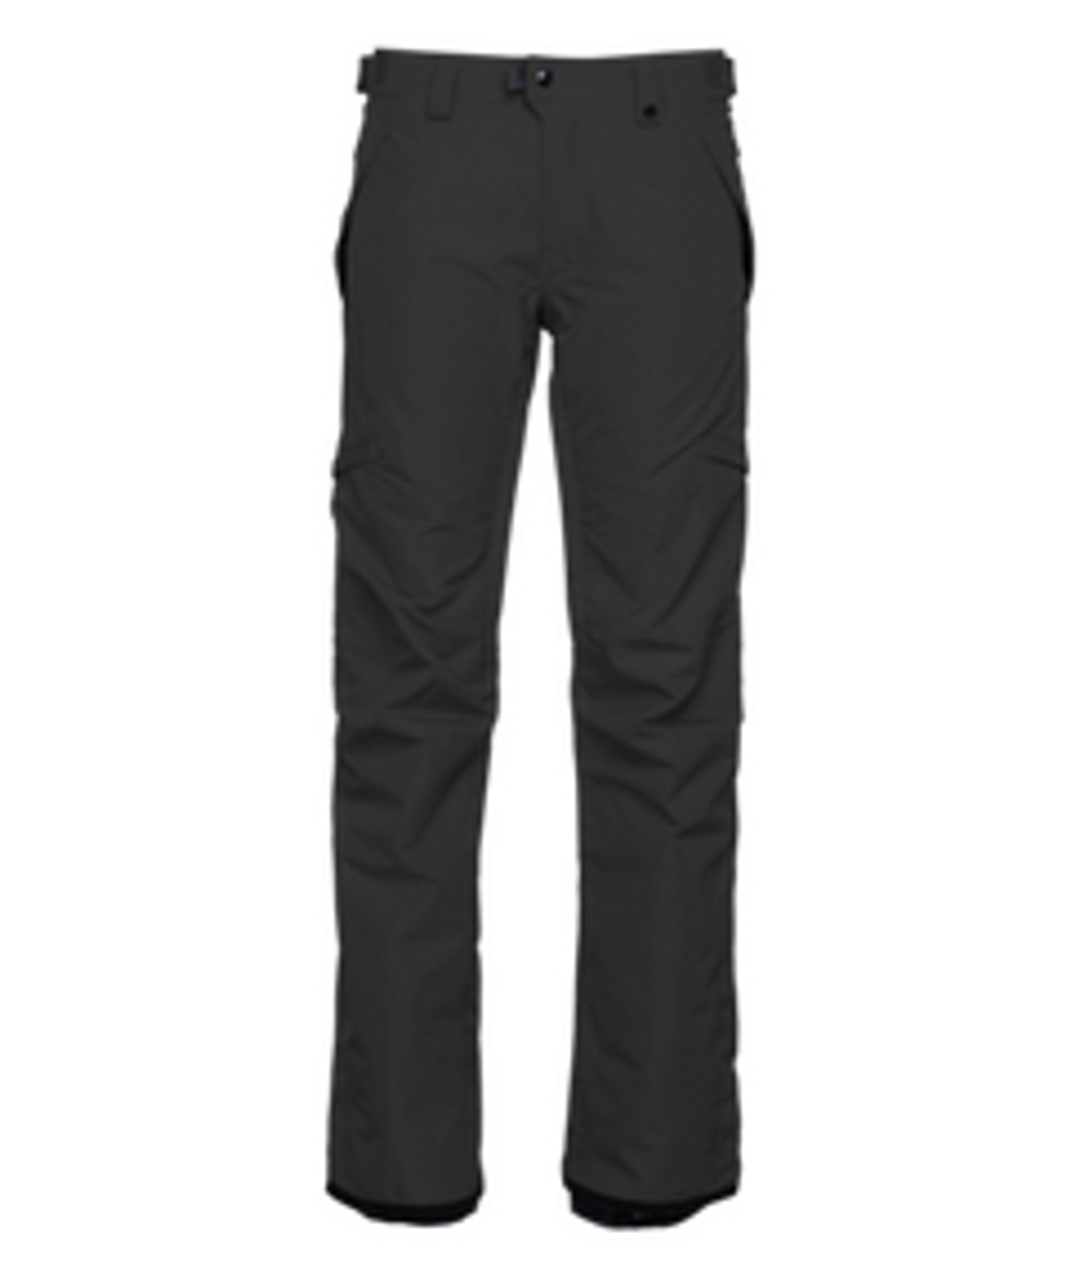 686 Smarty 3-in-1 Cargo Pant - Women's - Clothing